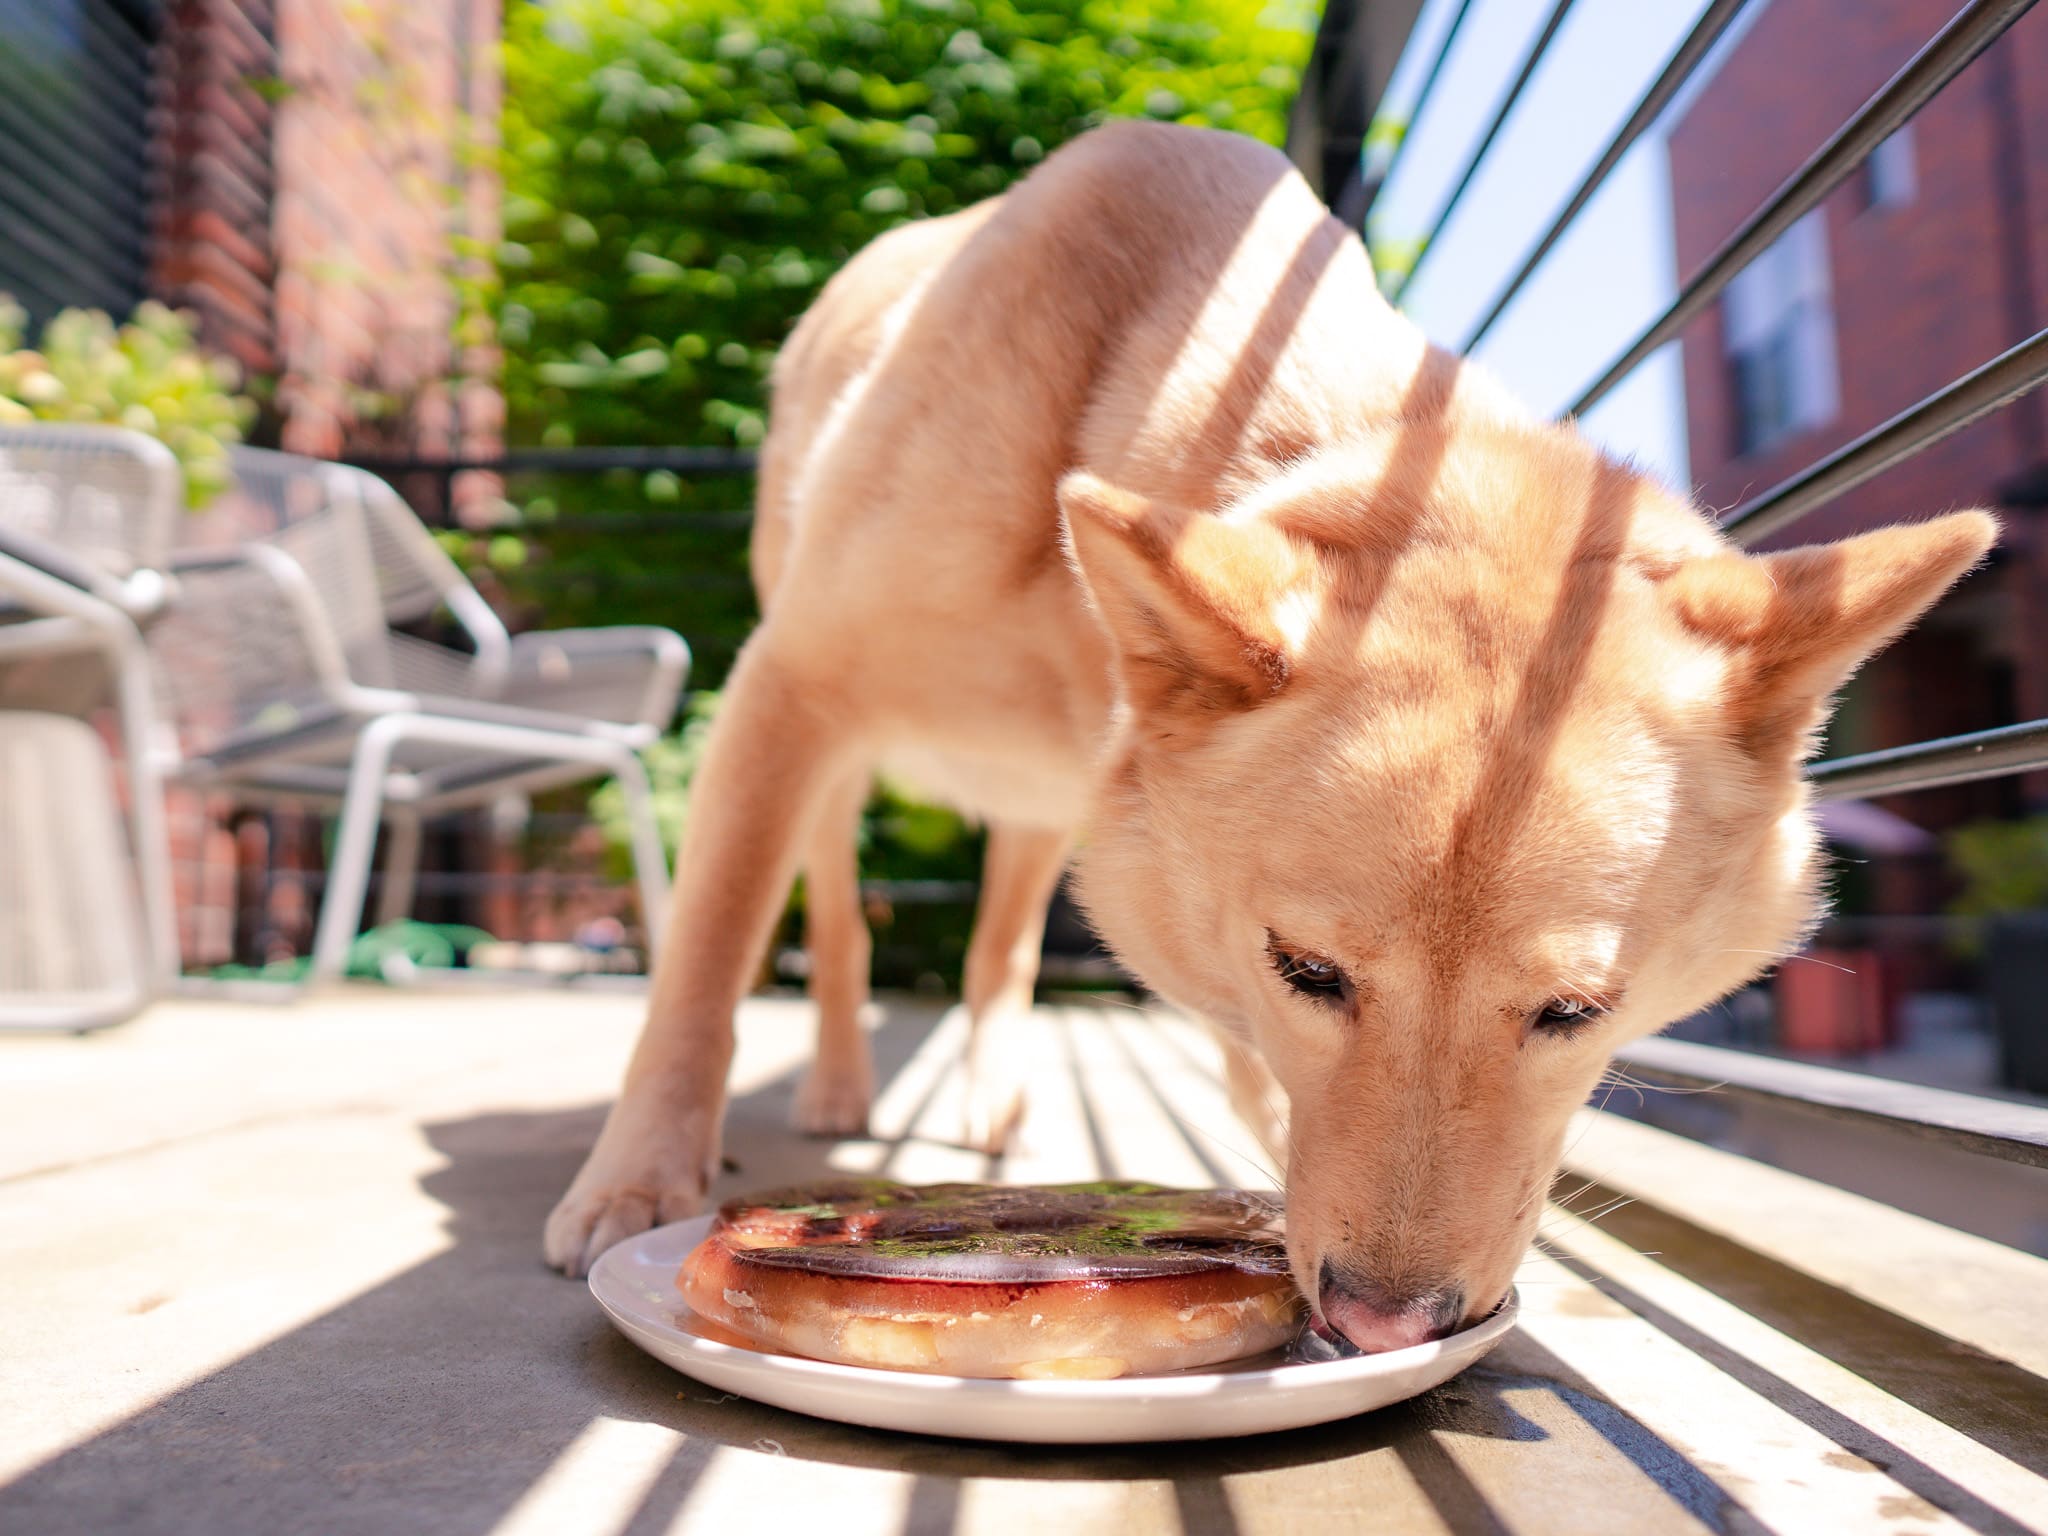 DIY Cake Recipe For Dogs: Keep Dogs Cool in Summer